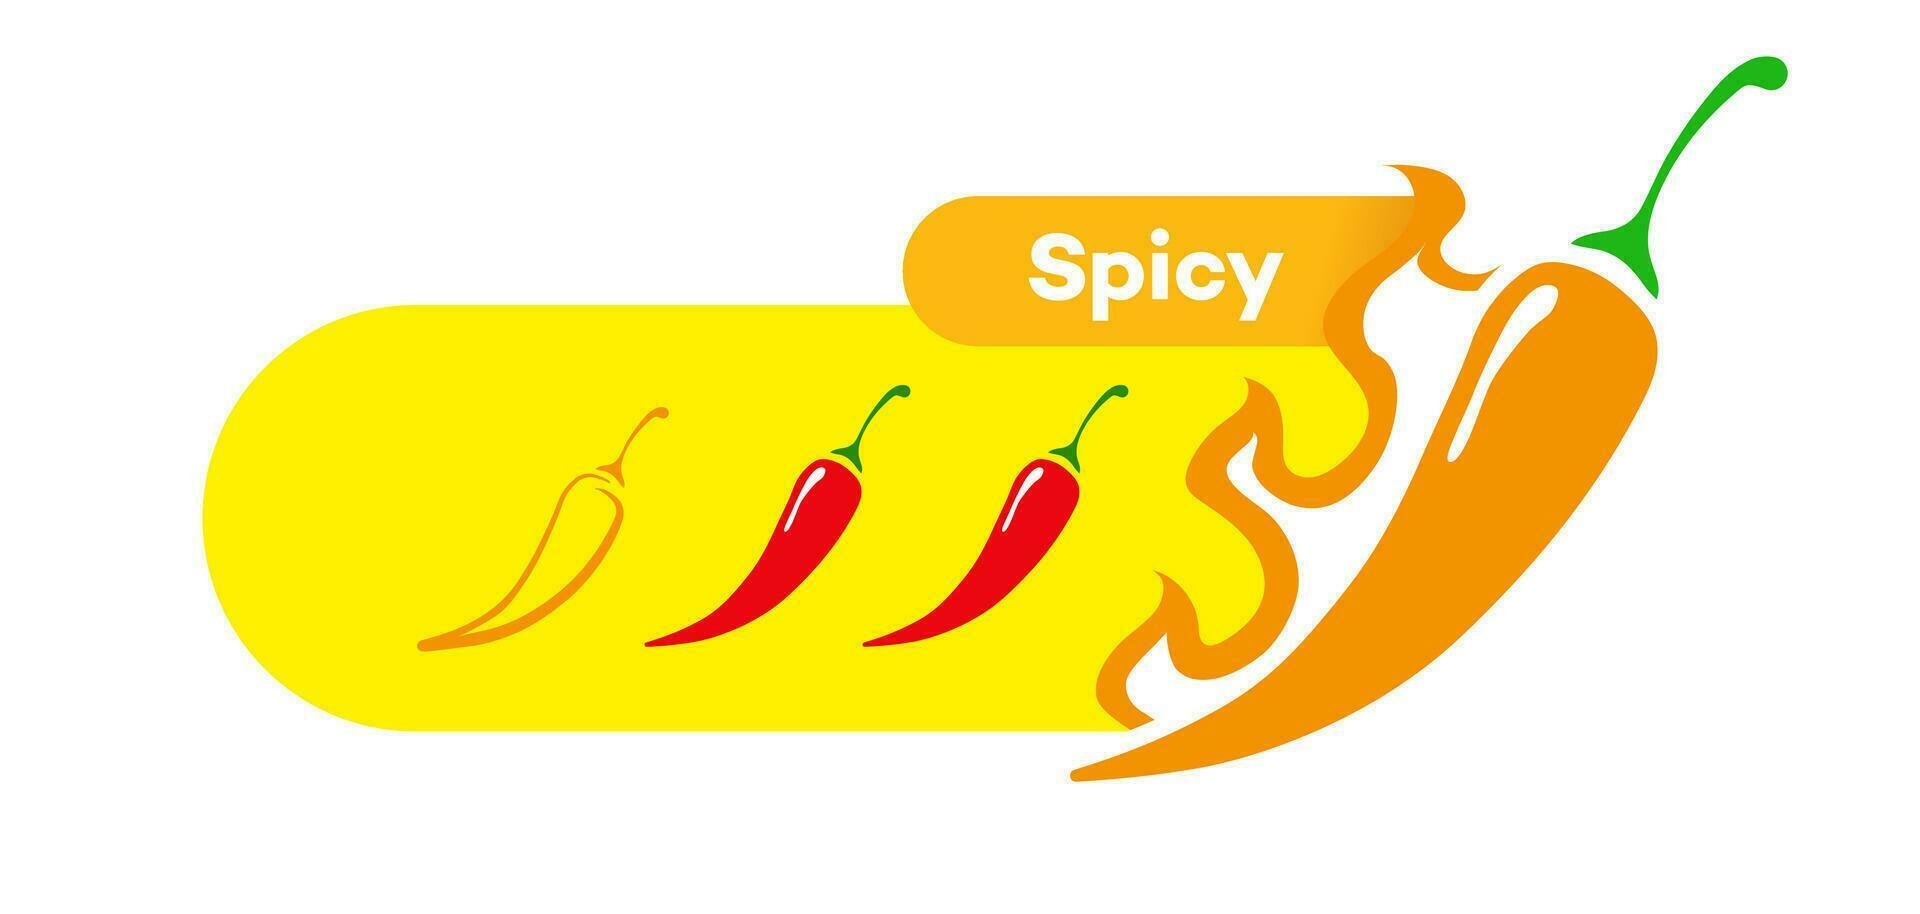 Spicy chili level label isolated on background vector